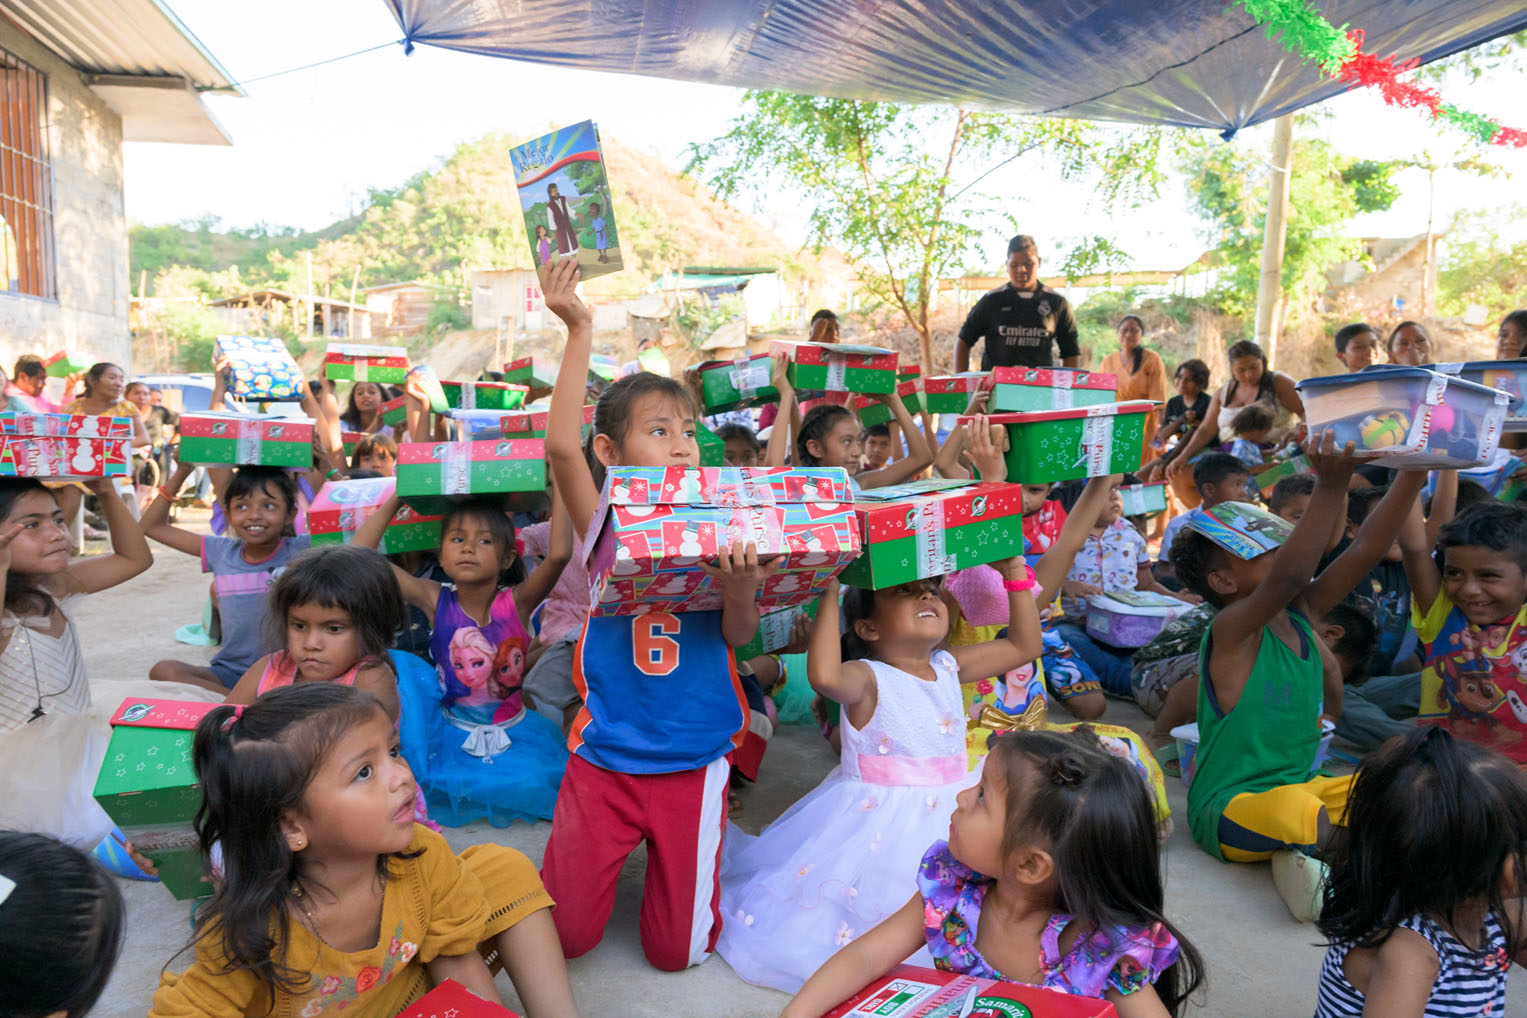 They were also blessed by the generosity shown by God's people through shoebox gifts.